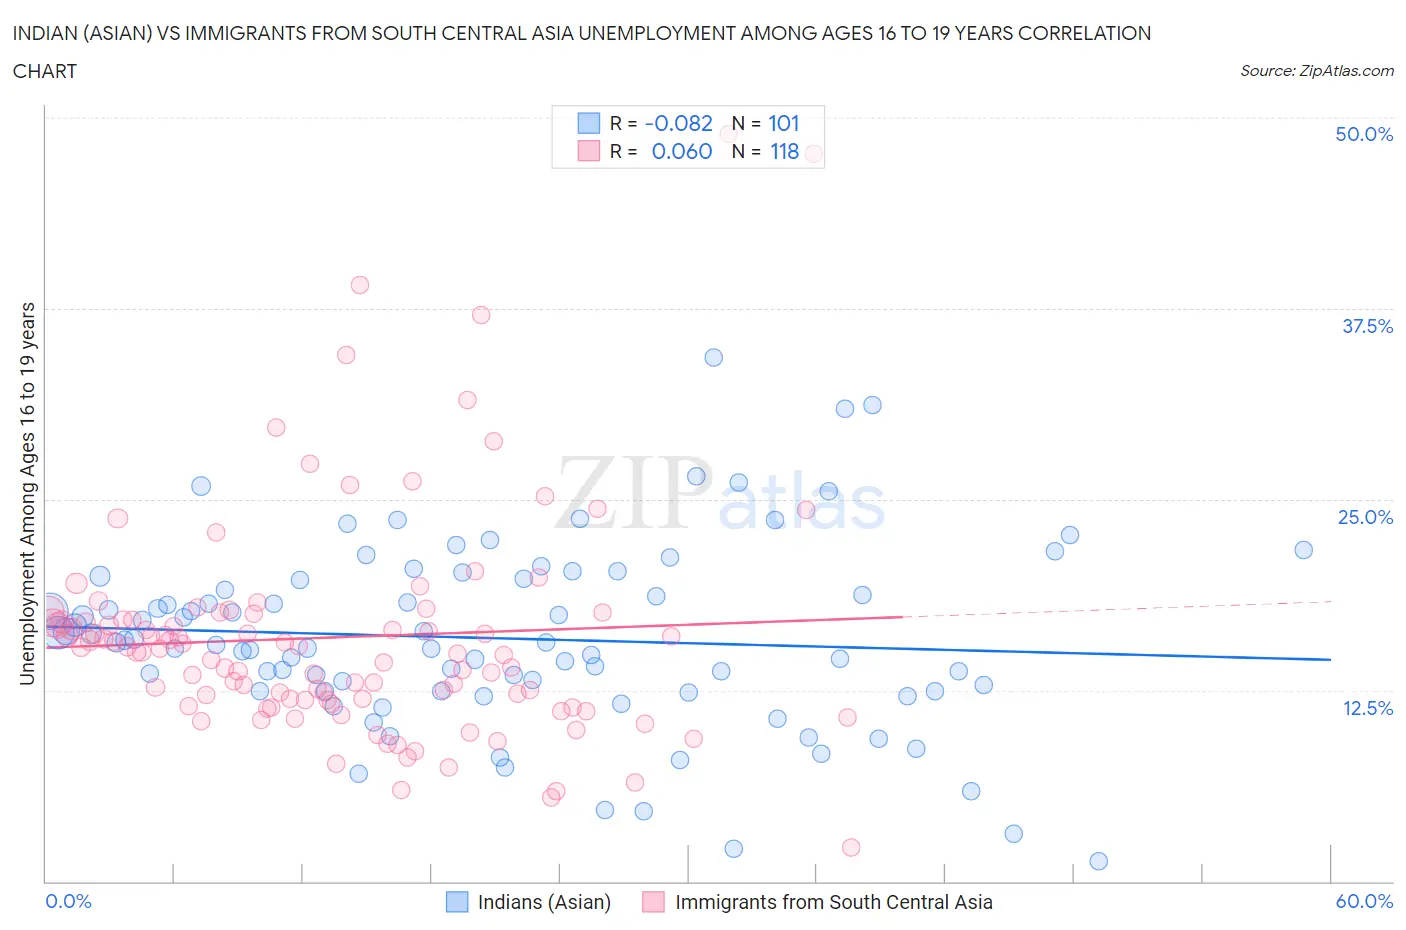 Indian (Asian) vs Immigrants from South Central Asia Unemployment Among Ages 16 to 19 years